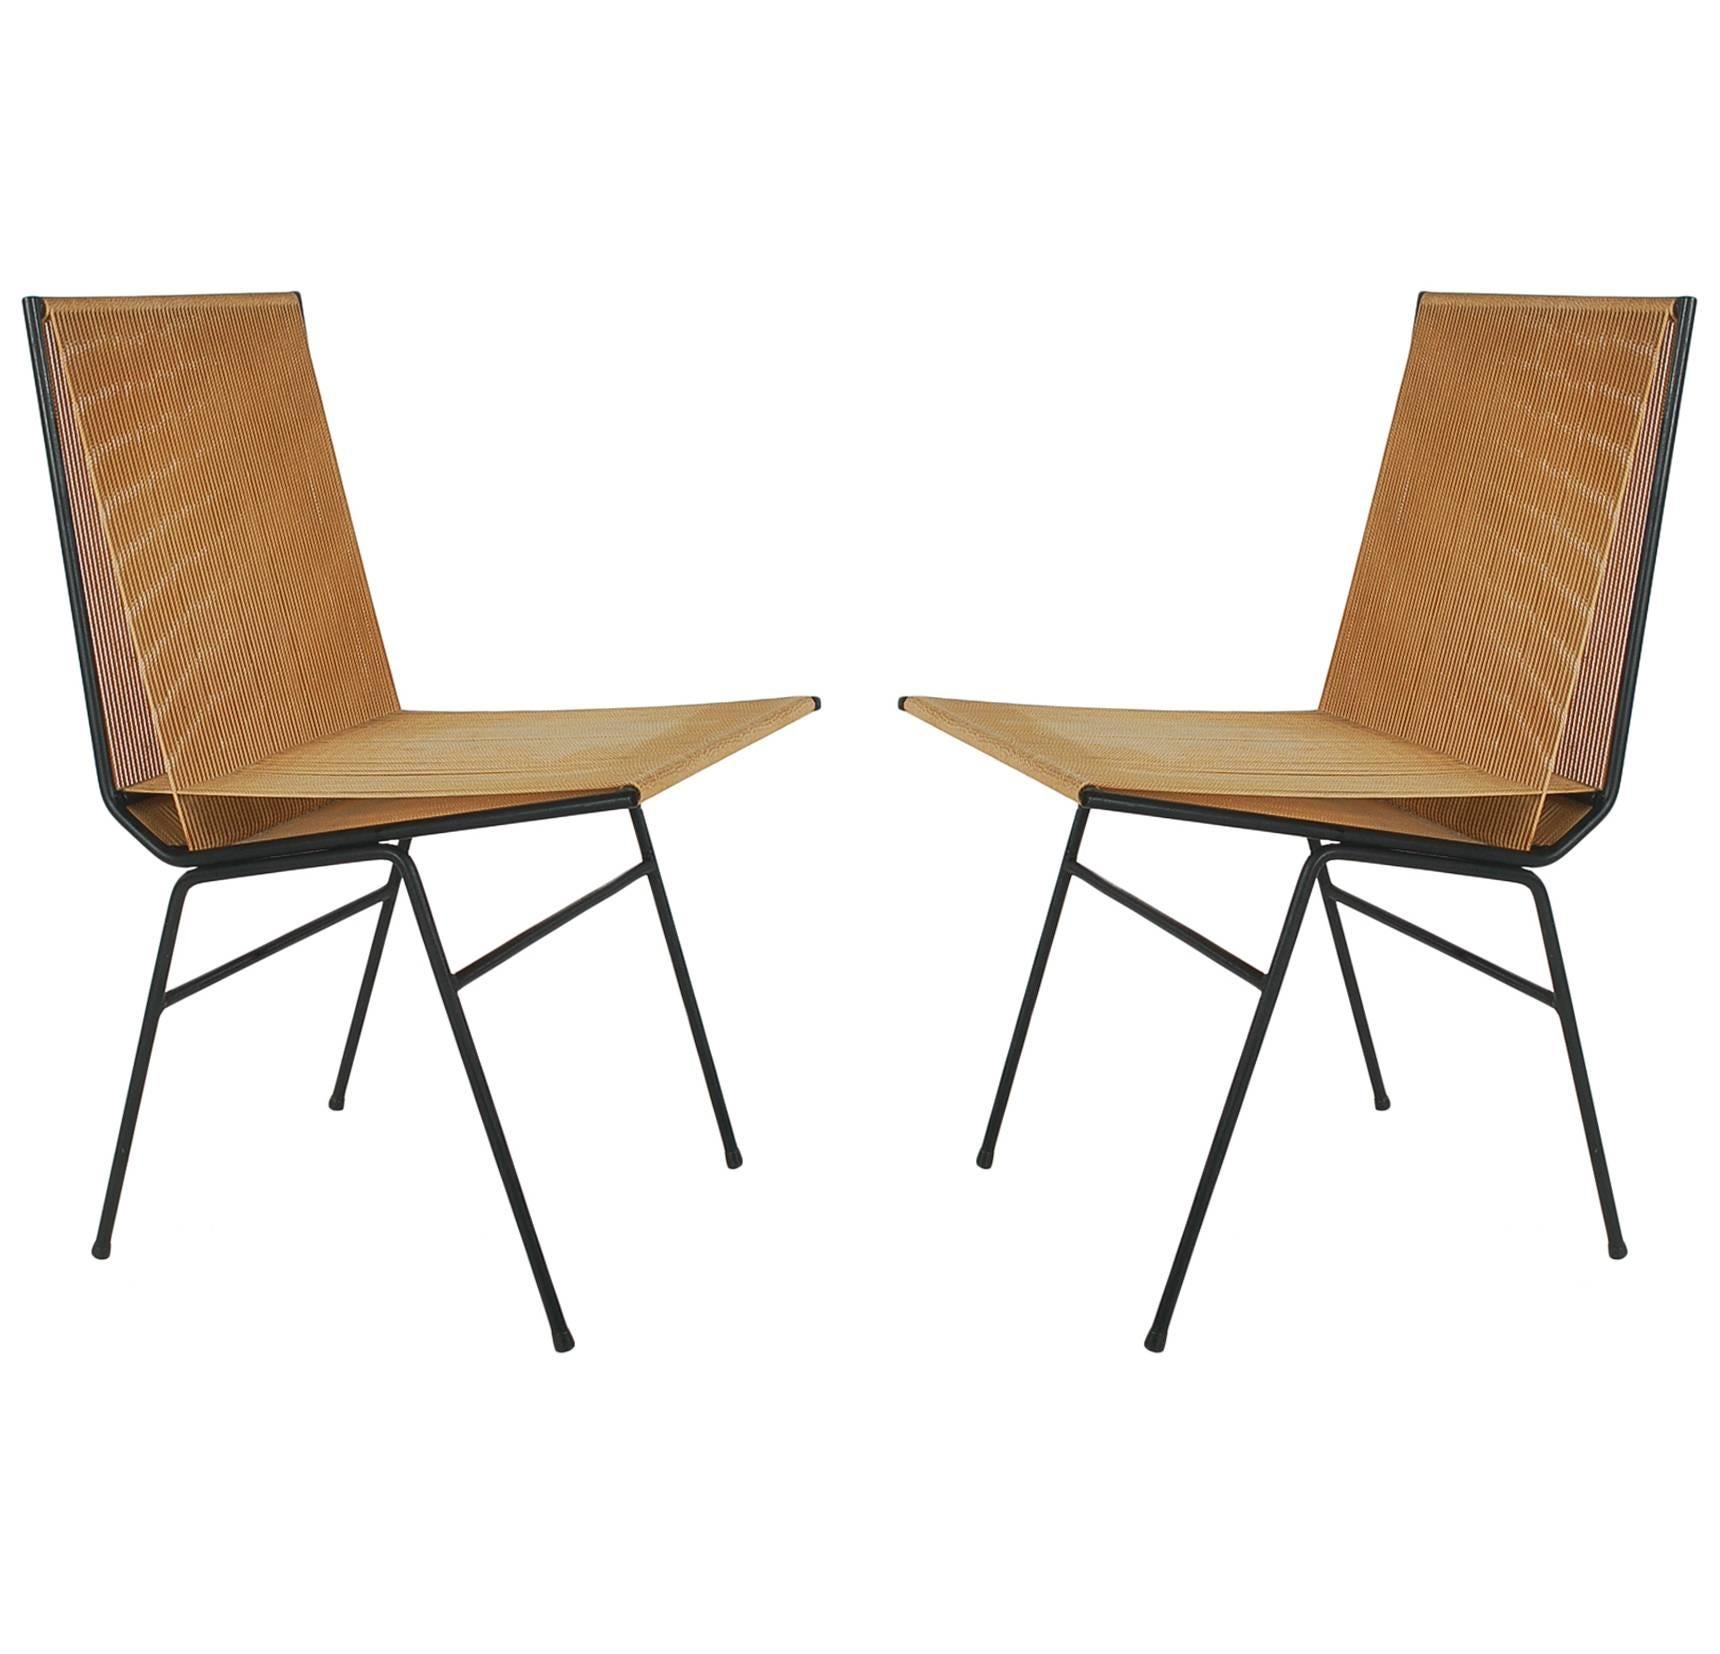 Pair of Mid-Century Modern Allan Gould Cord or String Chairs with Iron Frames